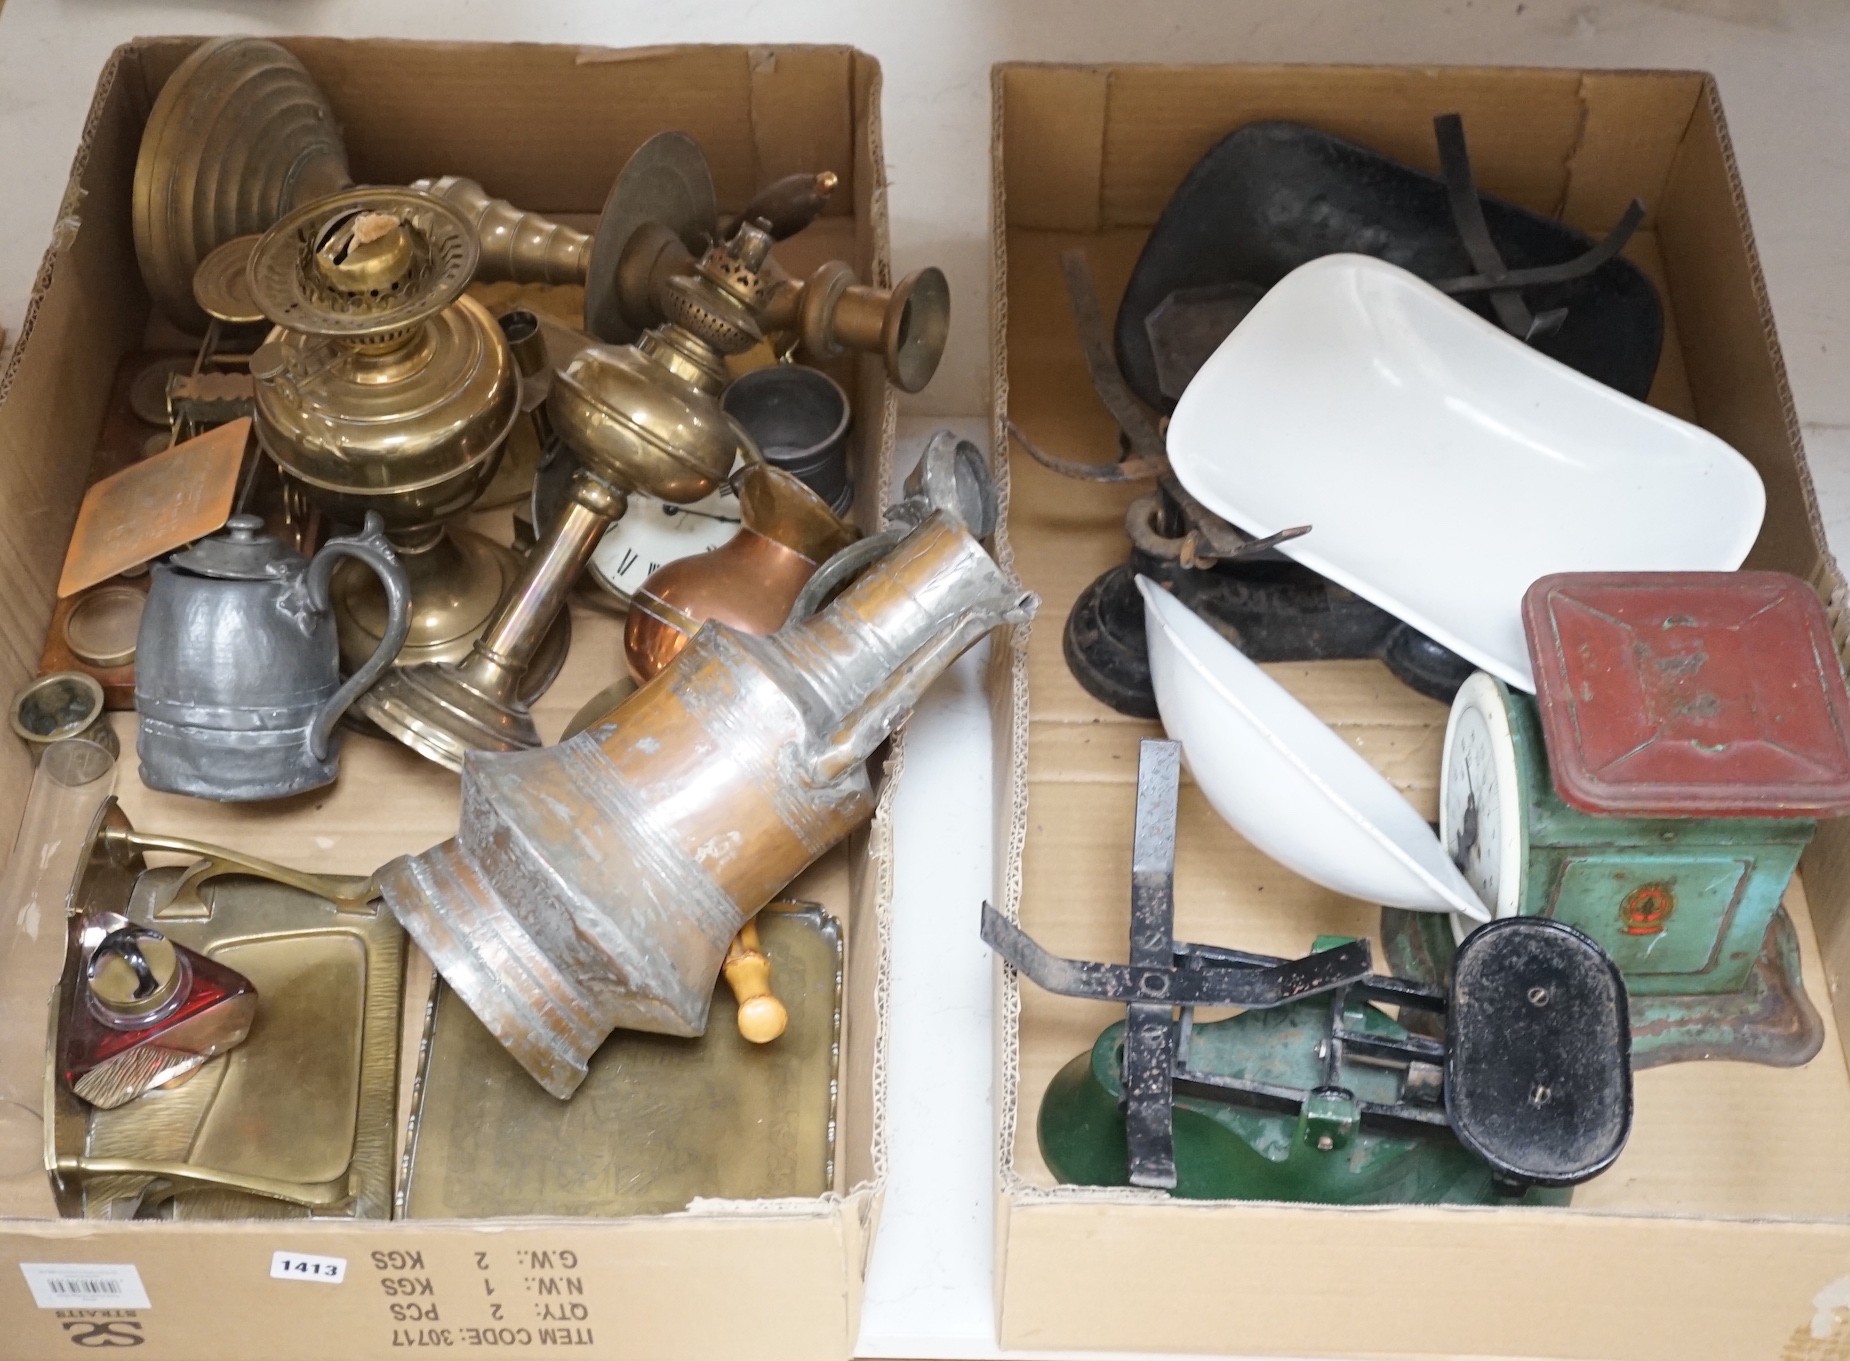 A selection of brass wares, to include an Art Nouveau style ink stand, a Parkins & Gotts postal scales, oil lamps, and other